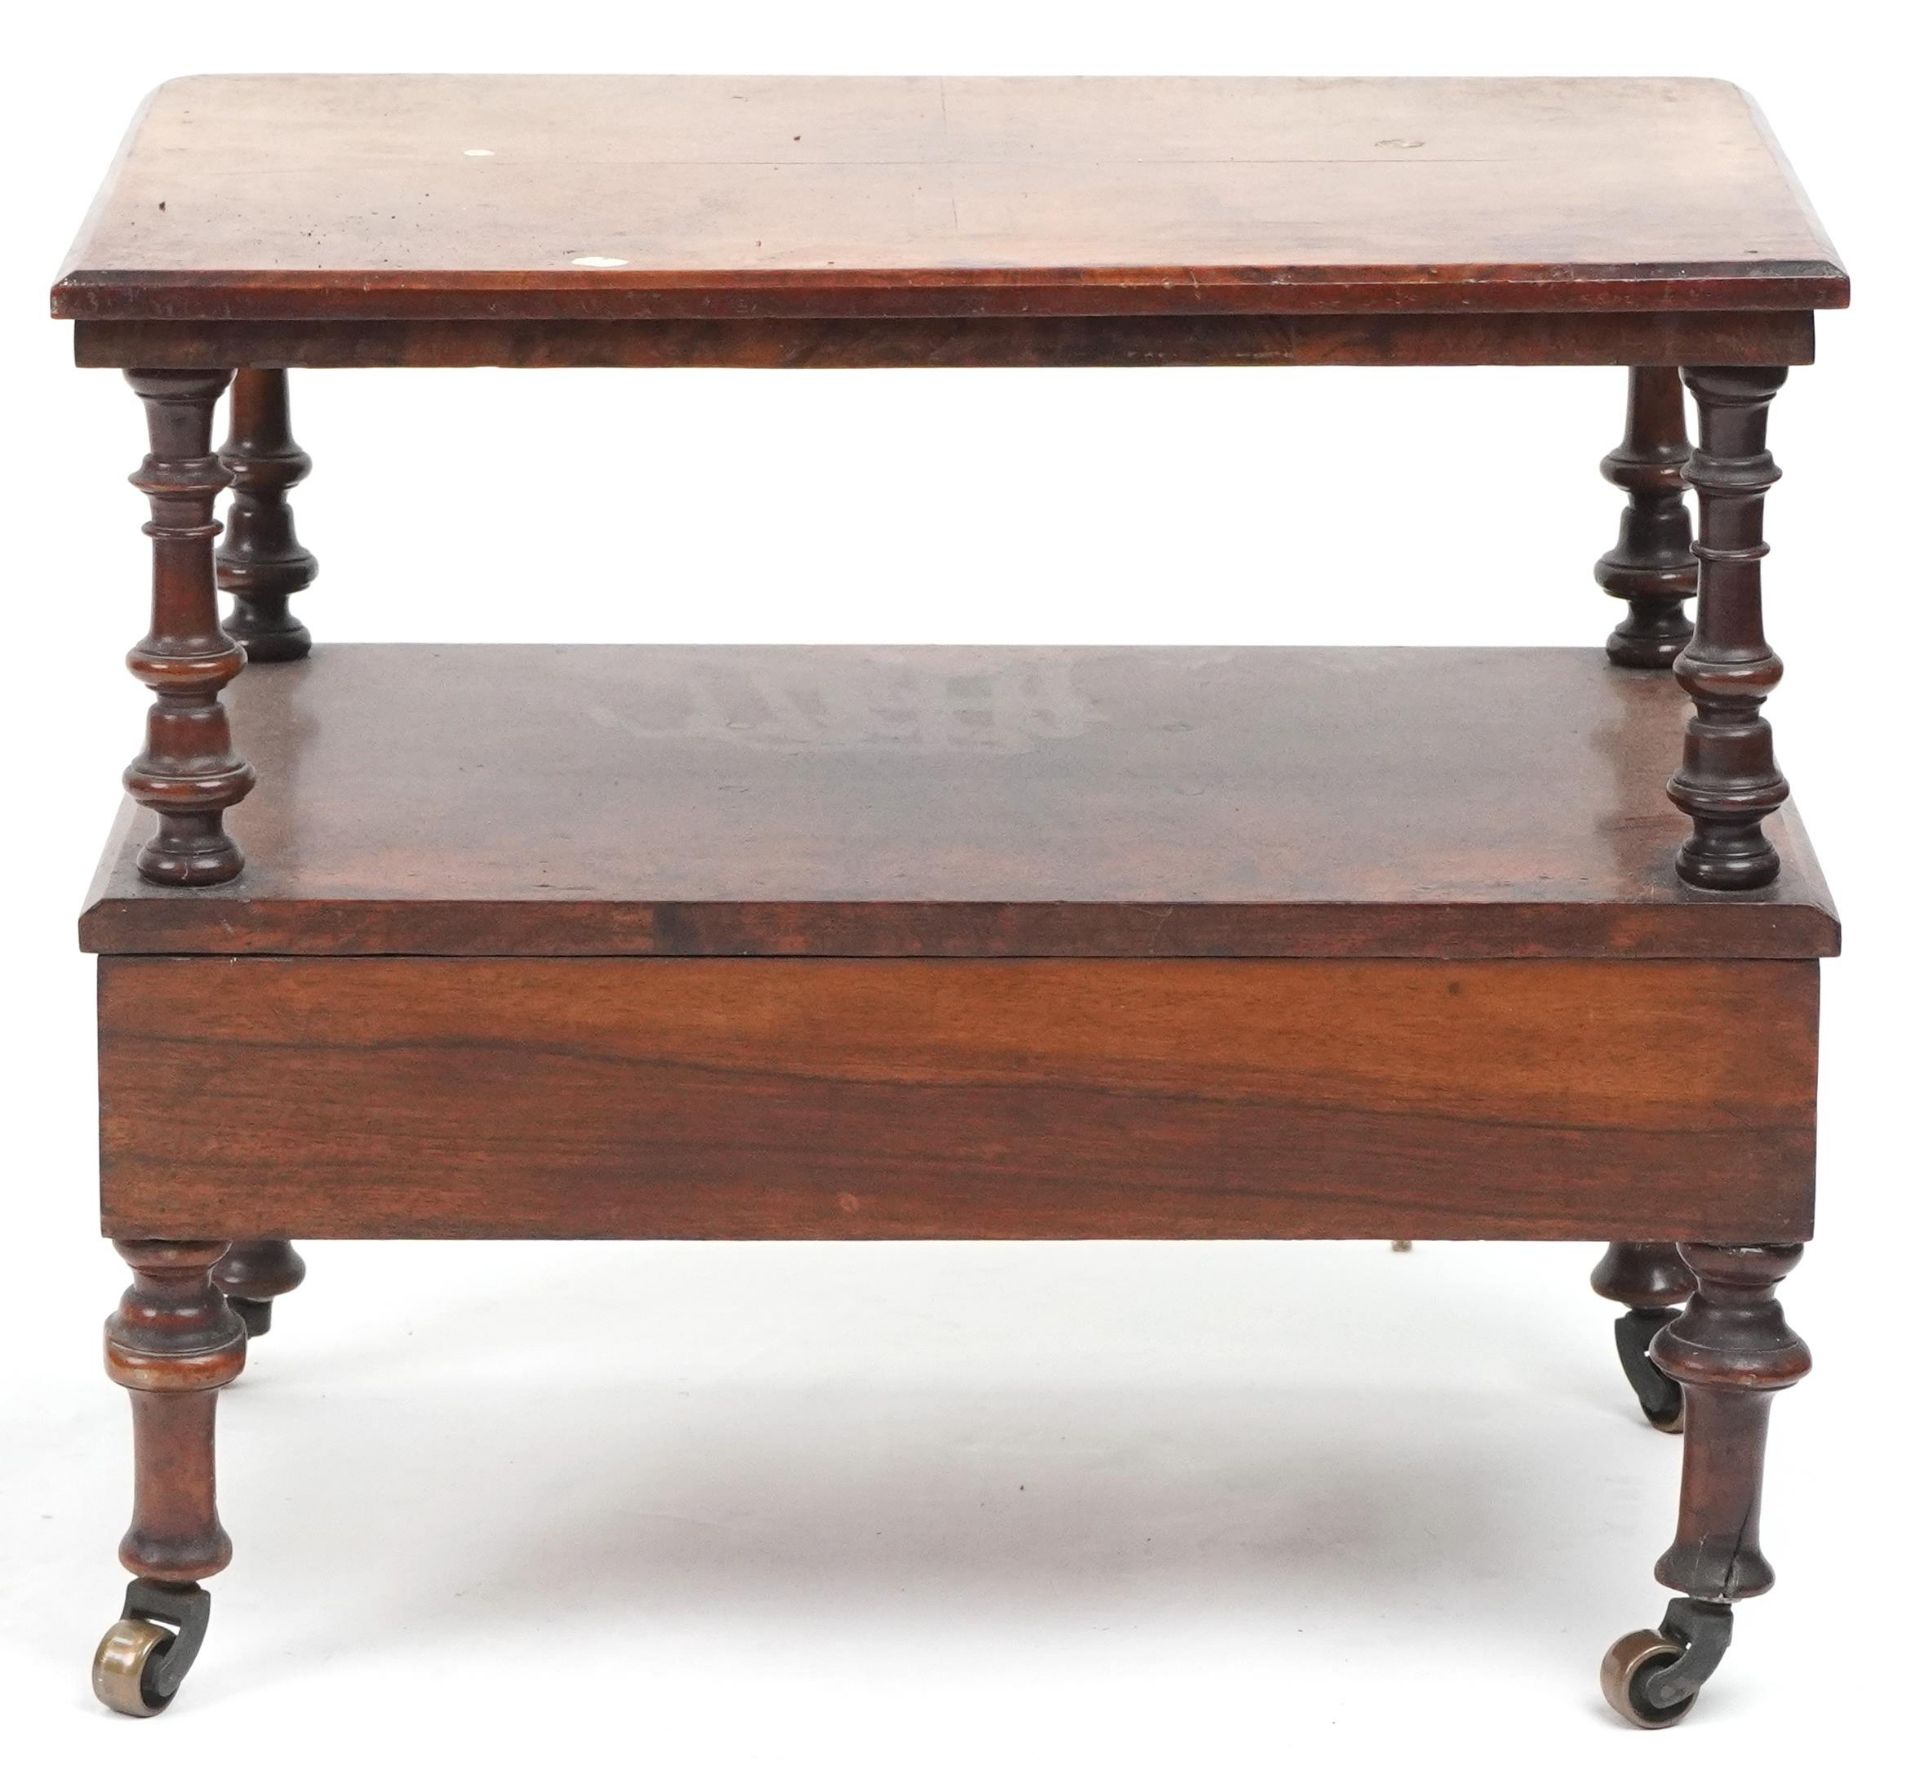 Victorian burr walnut two tier stand with frieze drawer and turned supports, 50cm H x 59cm W x - Image 4 of 4